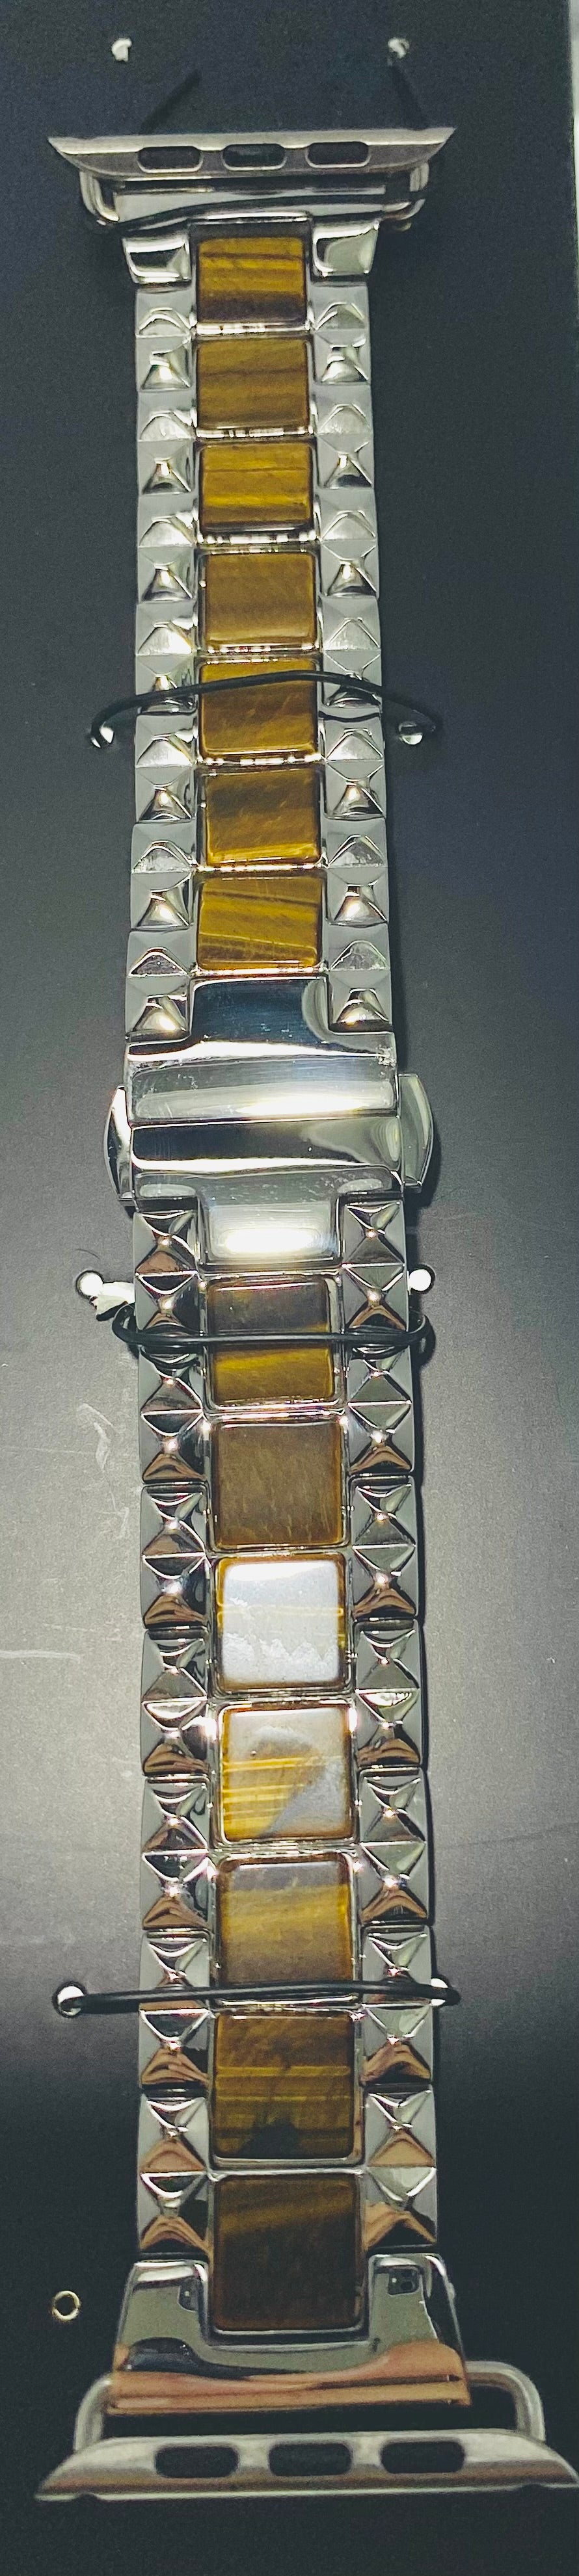 Apple iWatch Bands Metal Stainless Steel Strap TIGER EYE